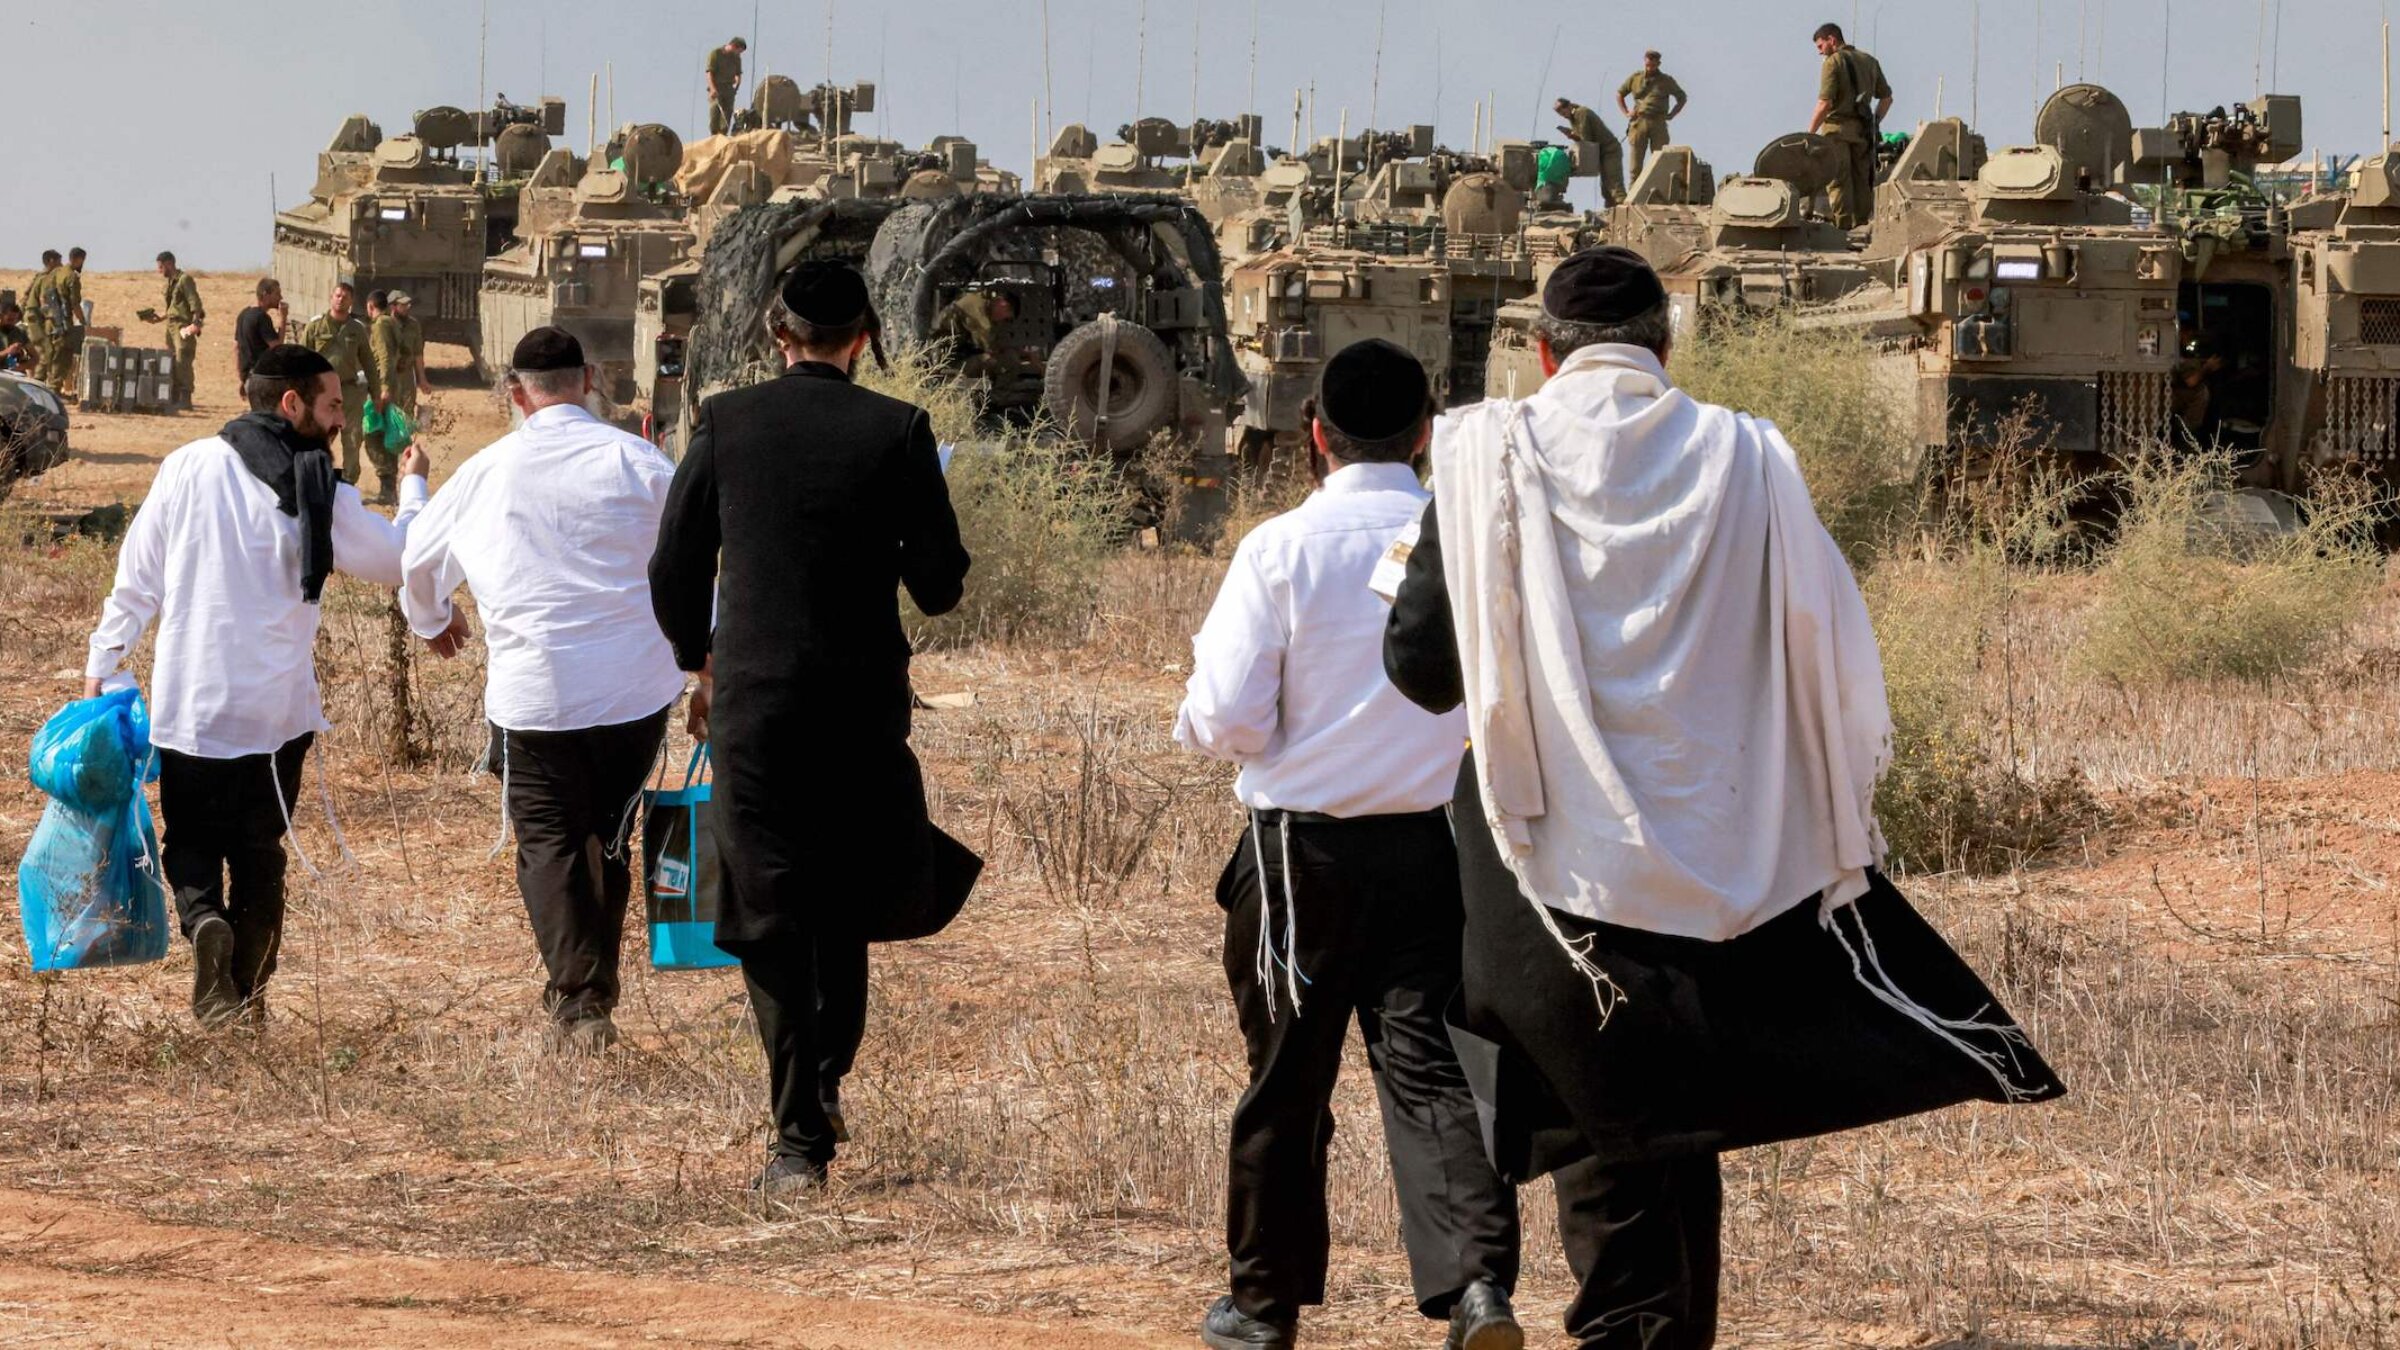 Haredi Jews visit Israeli soldiers to show their support as they deploy at a position near the border with Gaza in Southern Israel on Oct. 11.